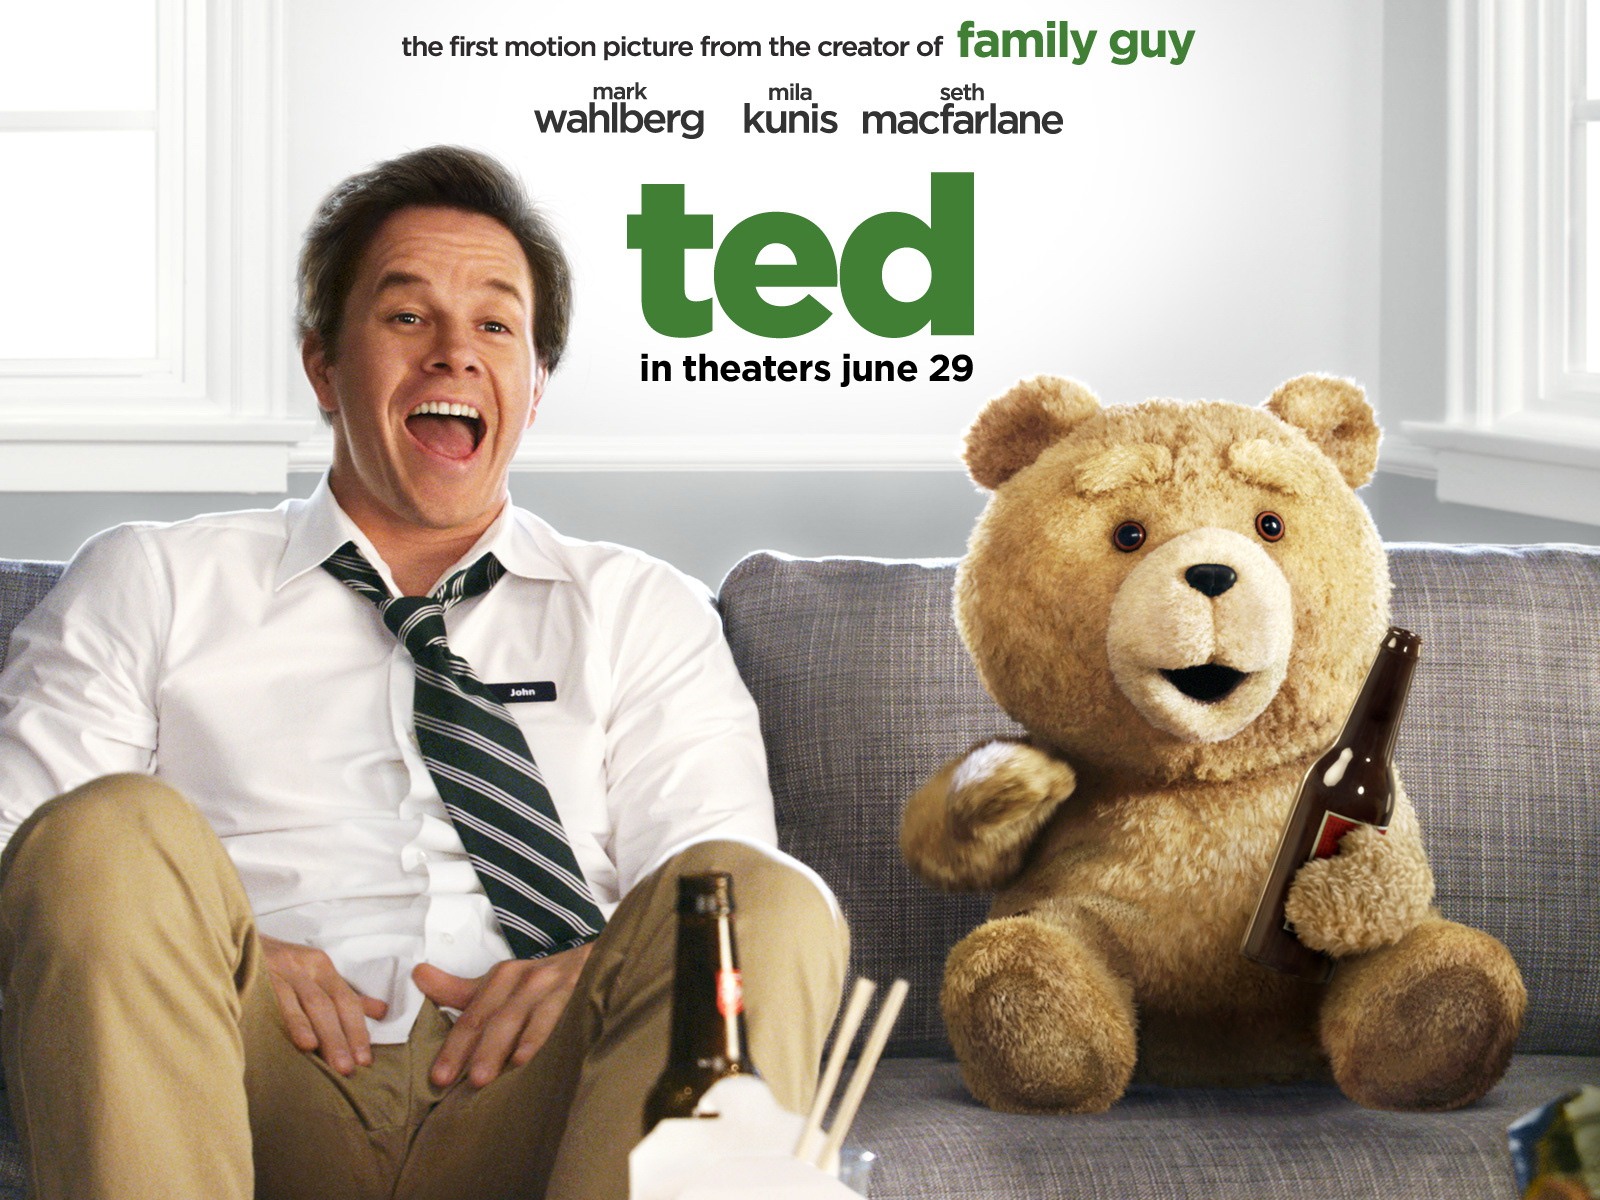 Ted 2012 HD movie wallpapers #1 - 1600x1200